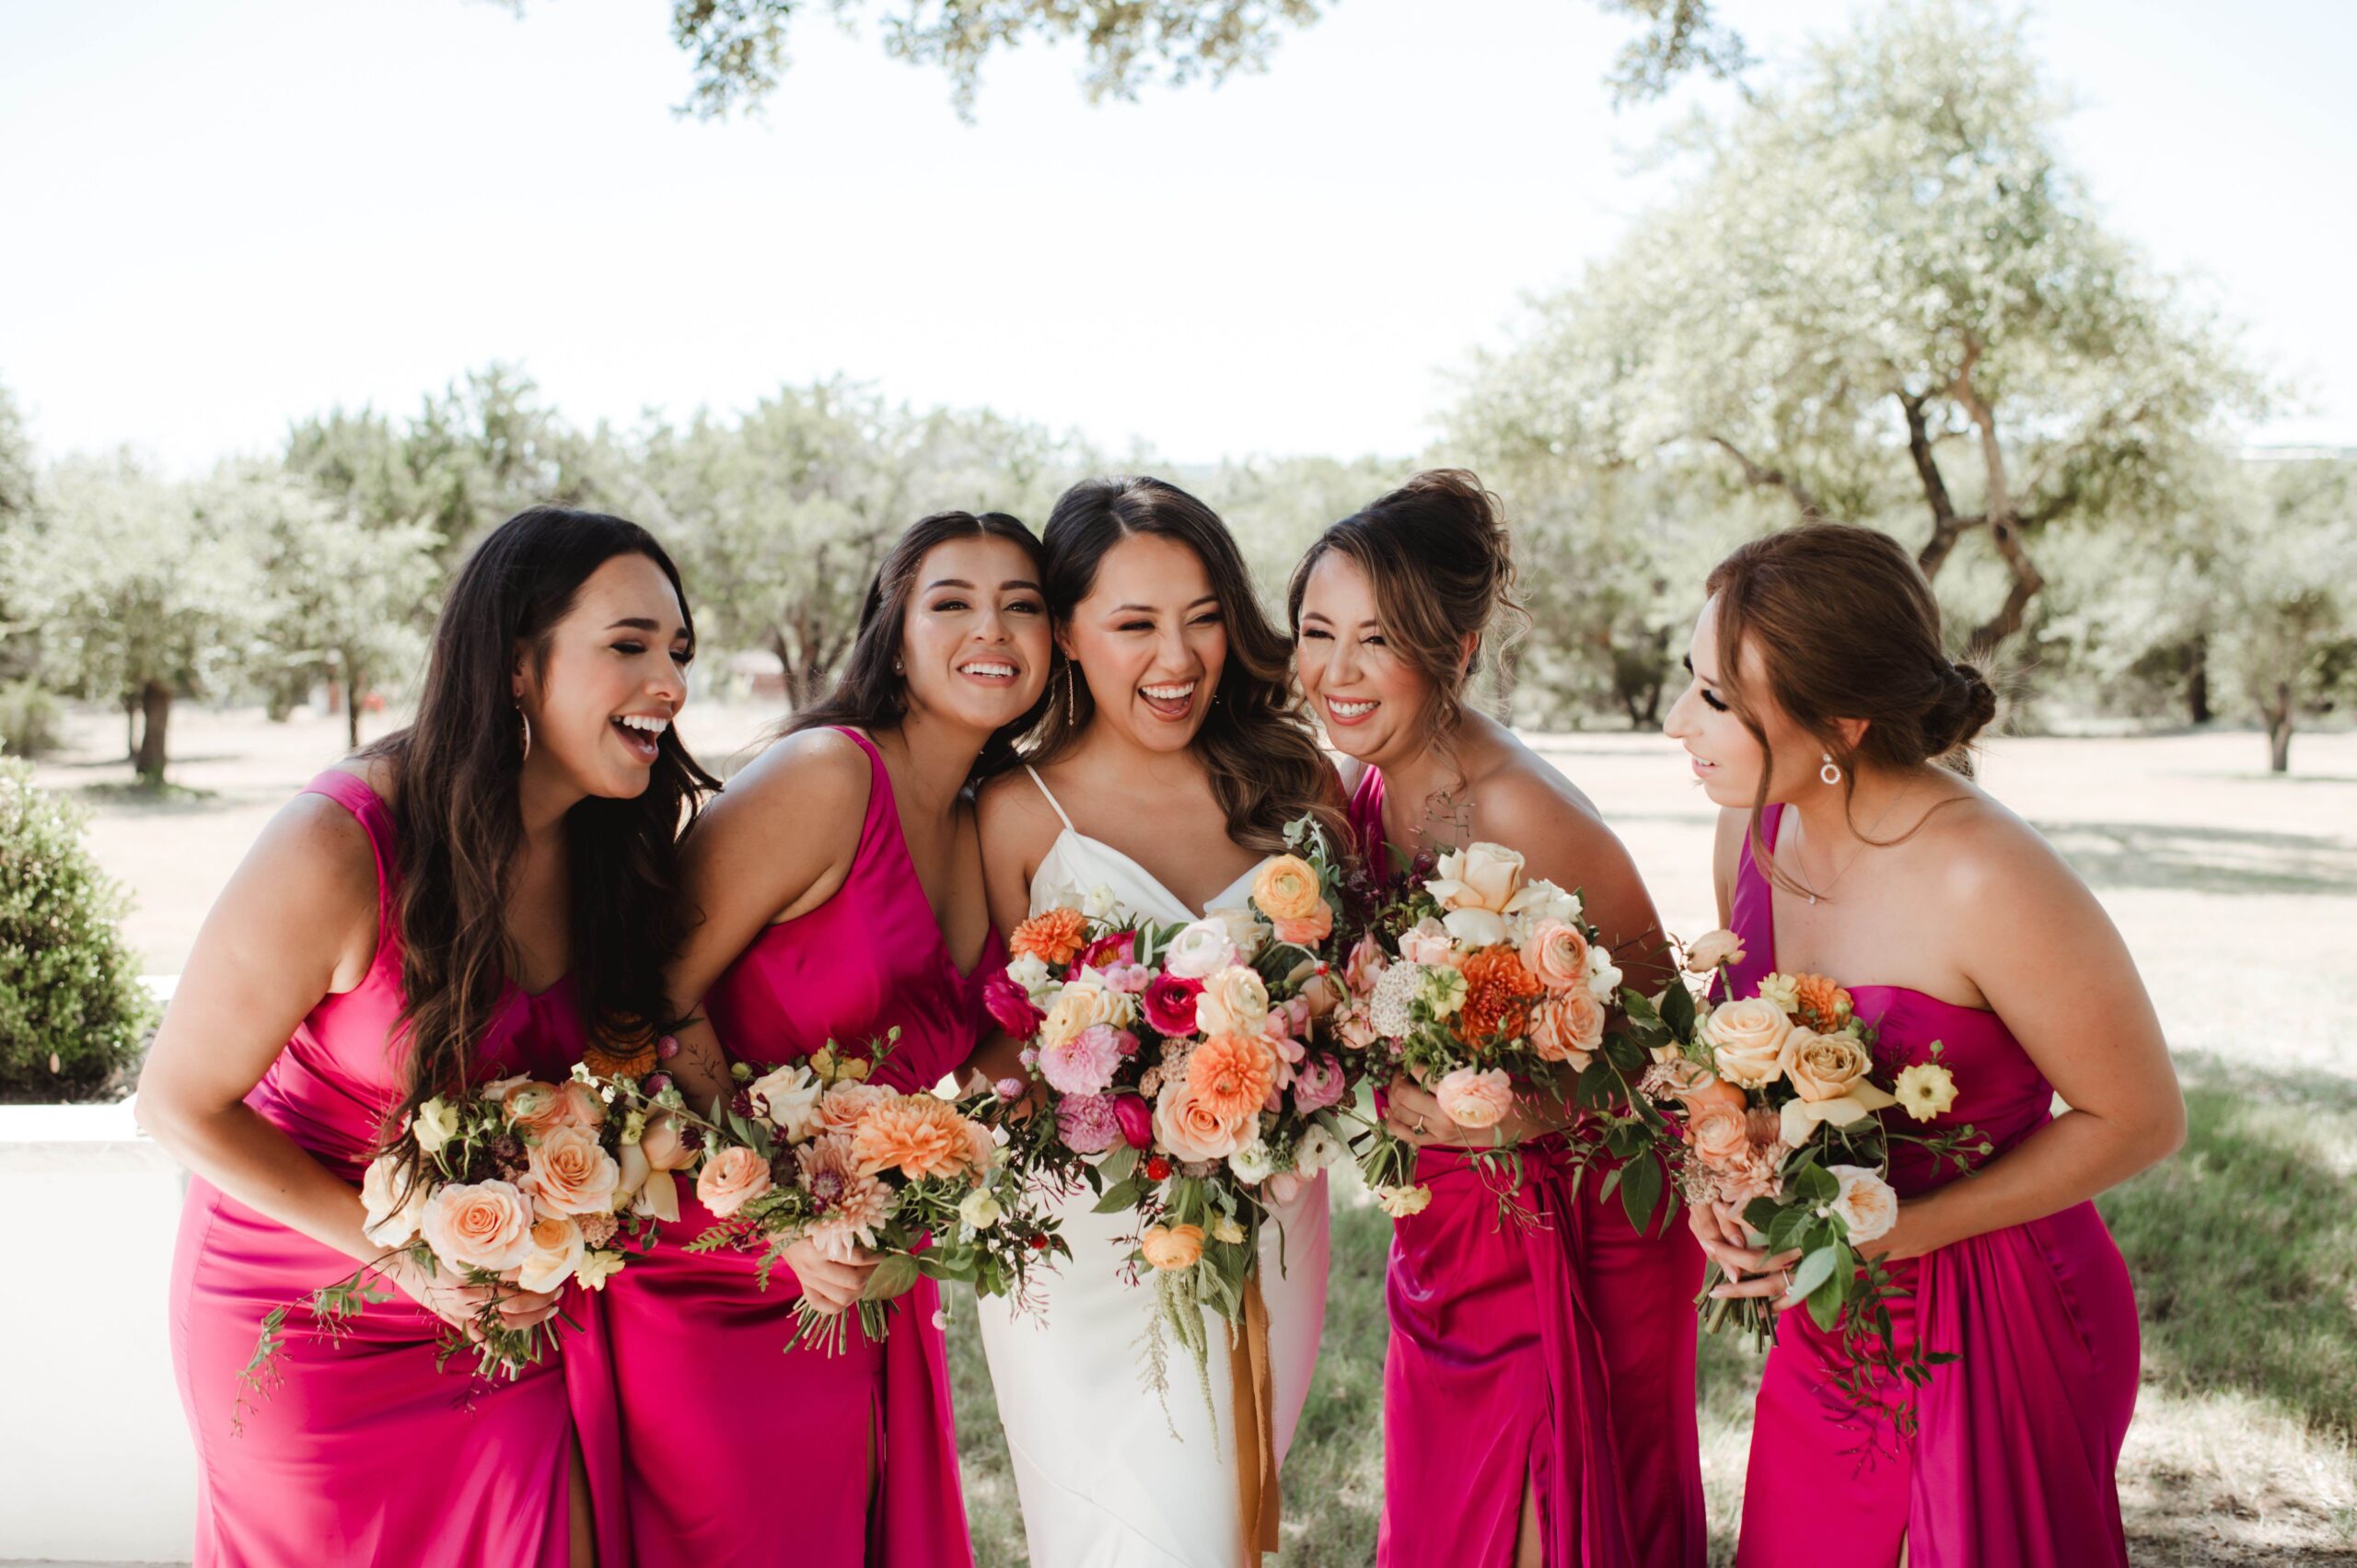 Bride laughing with her bridesmaids who are wearing pink dresses and holding summery peach bouquets